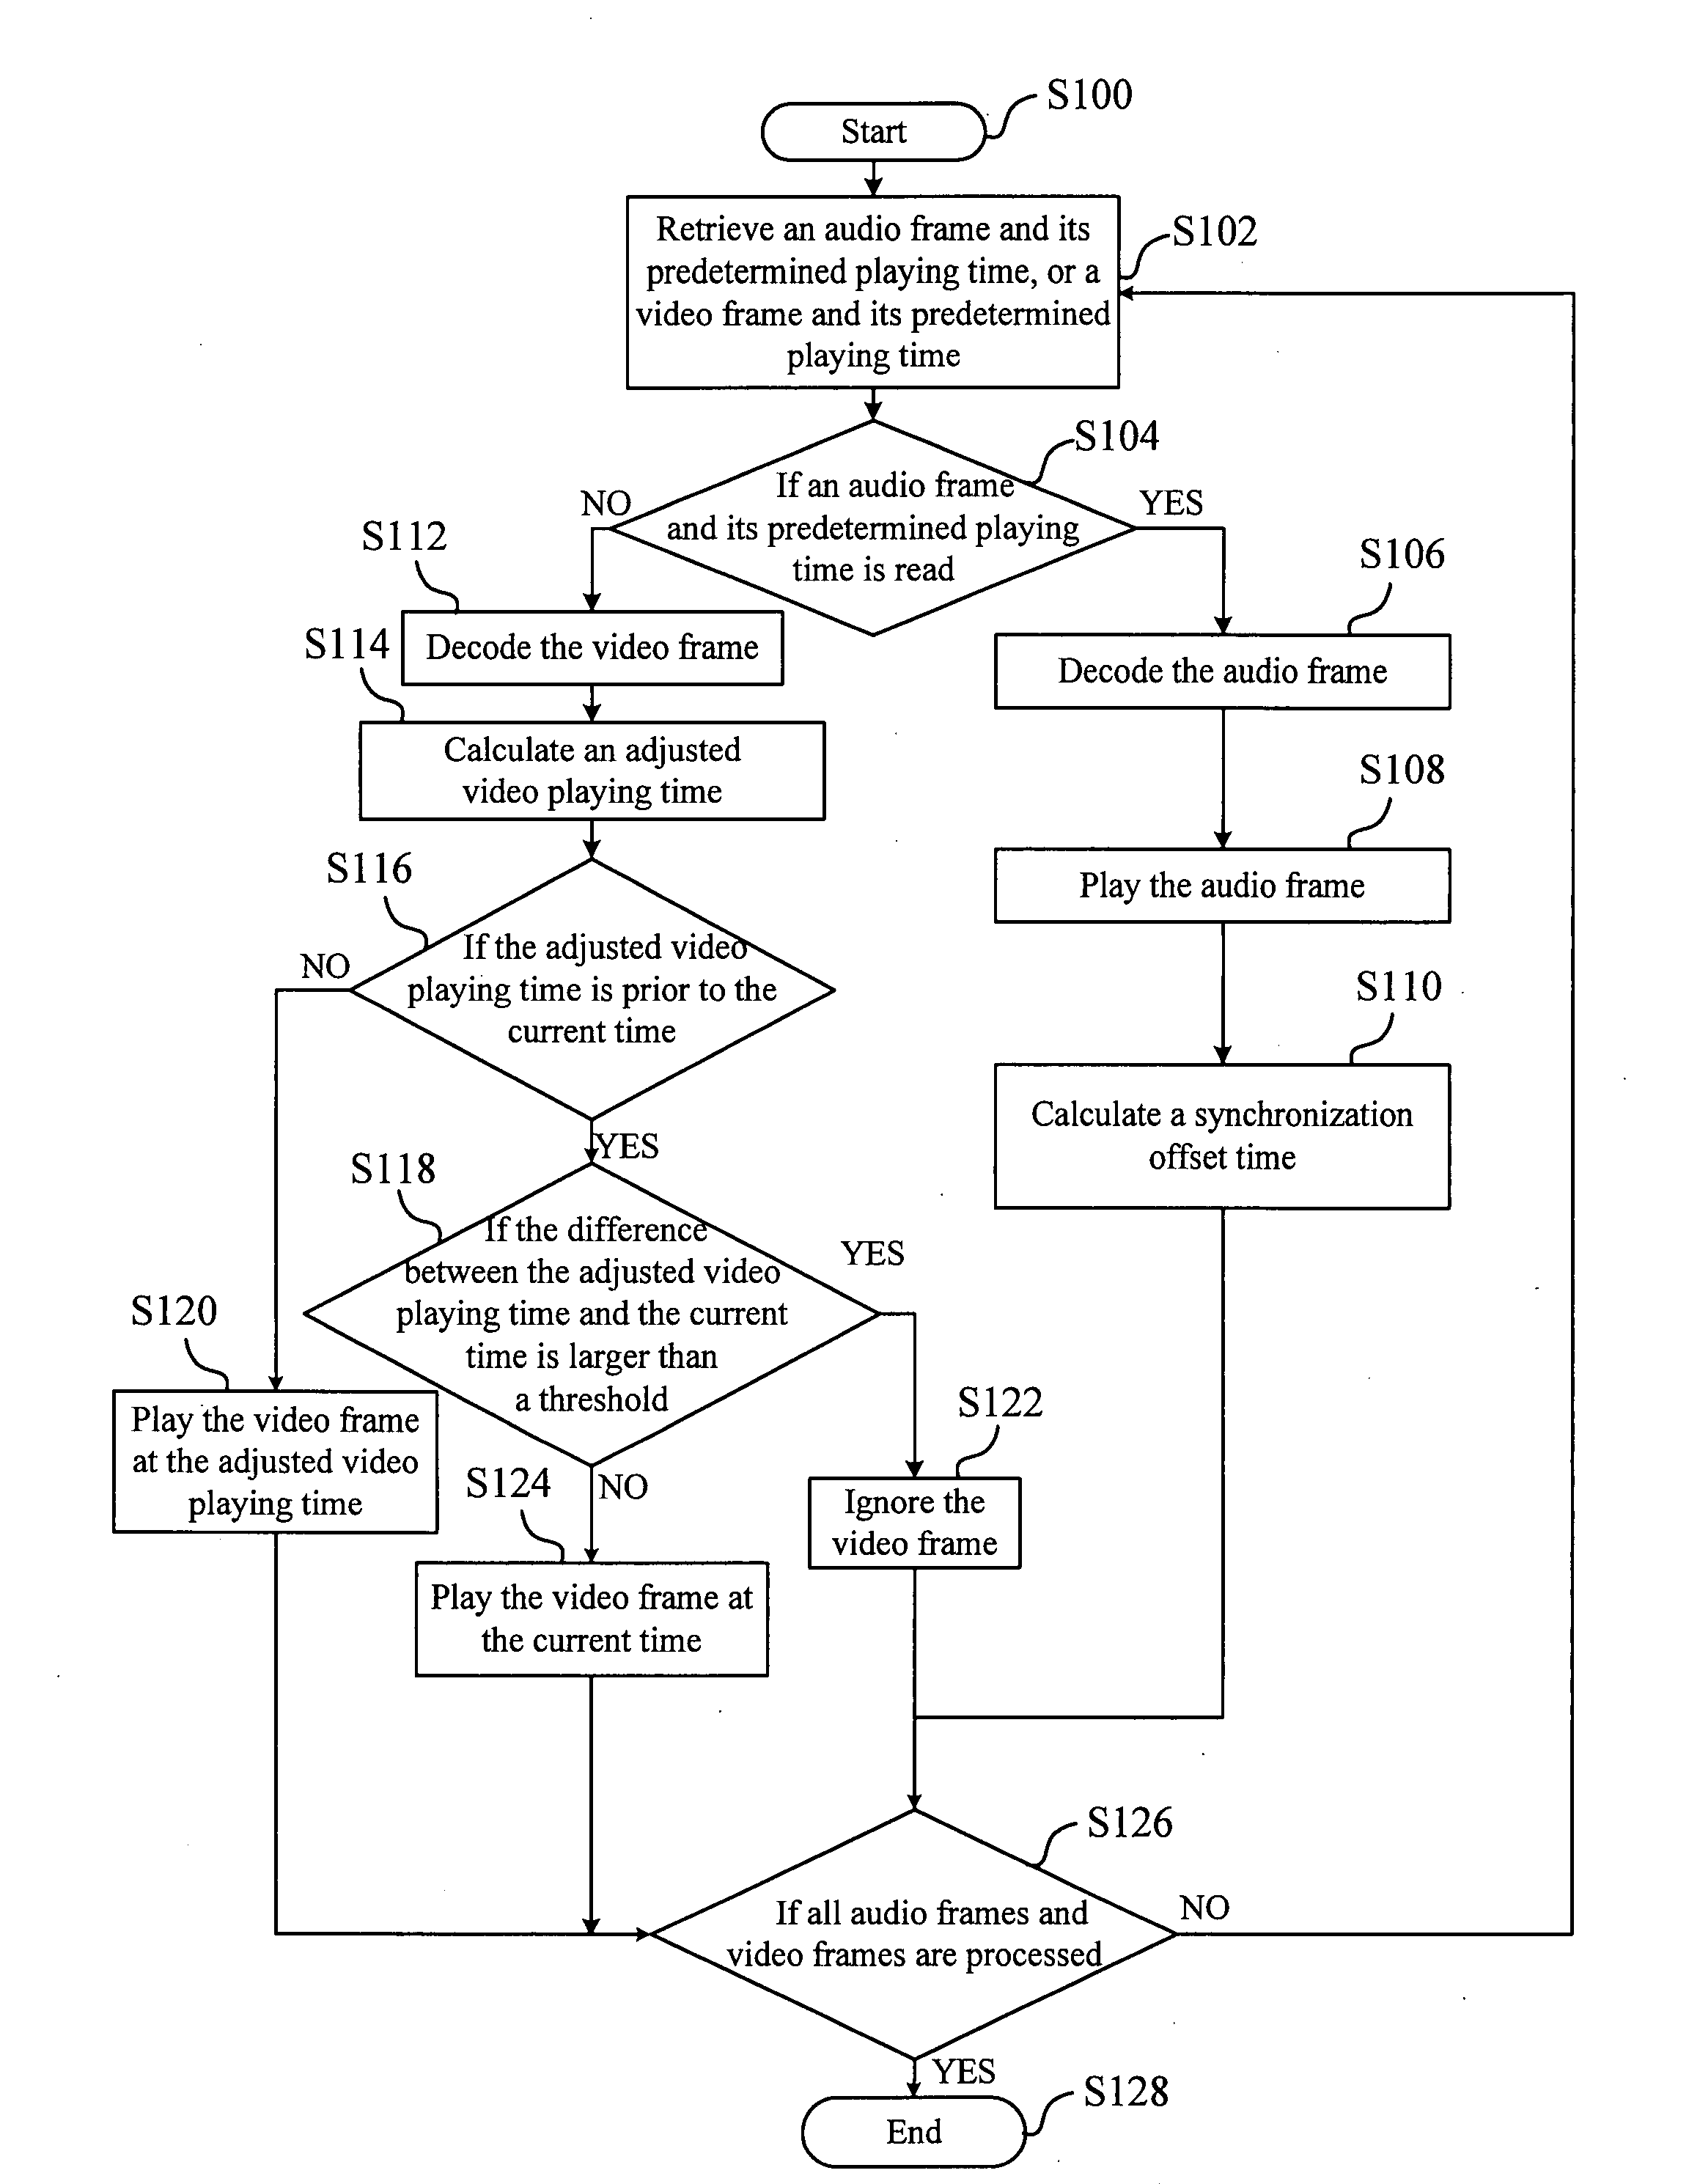 System and method for synchronizing video frames and audio frames